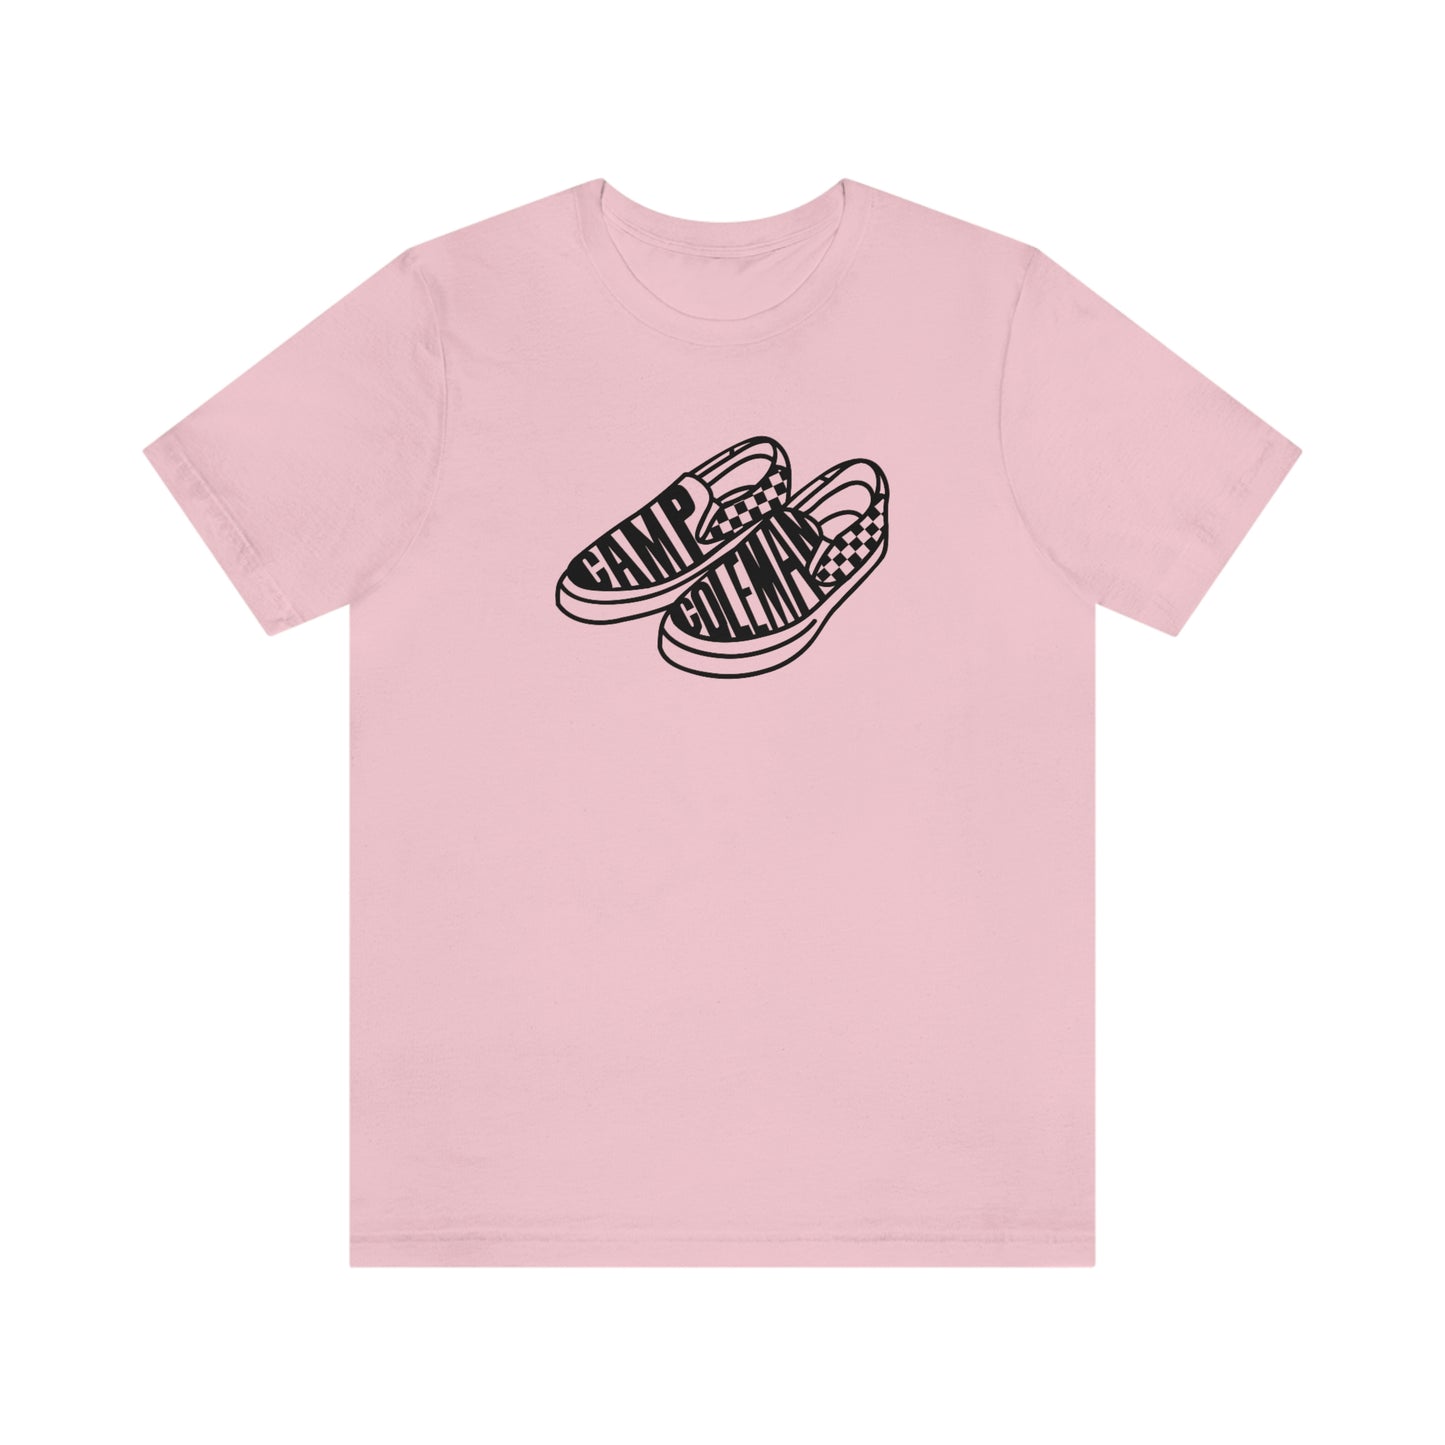 Coleman checkered skate shoes adult  Short Sleeve Tee (multiple colors)